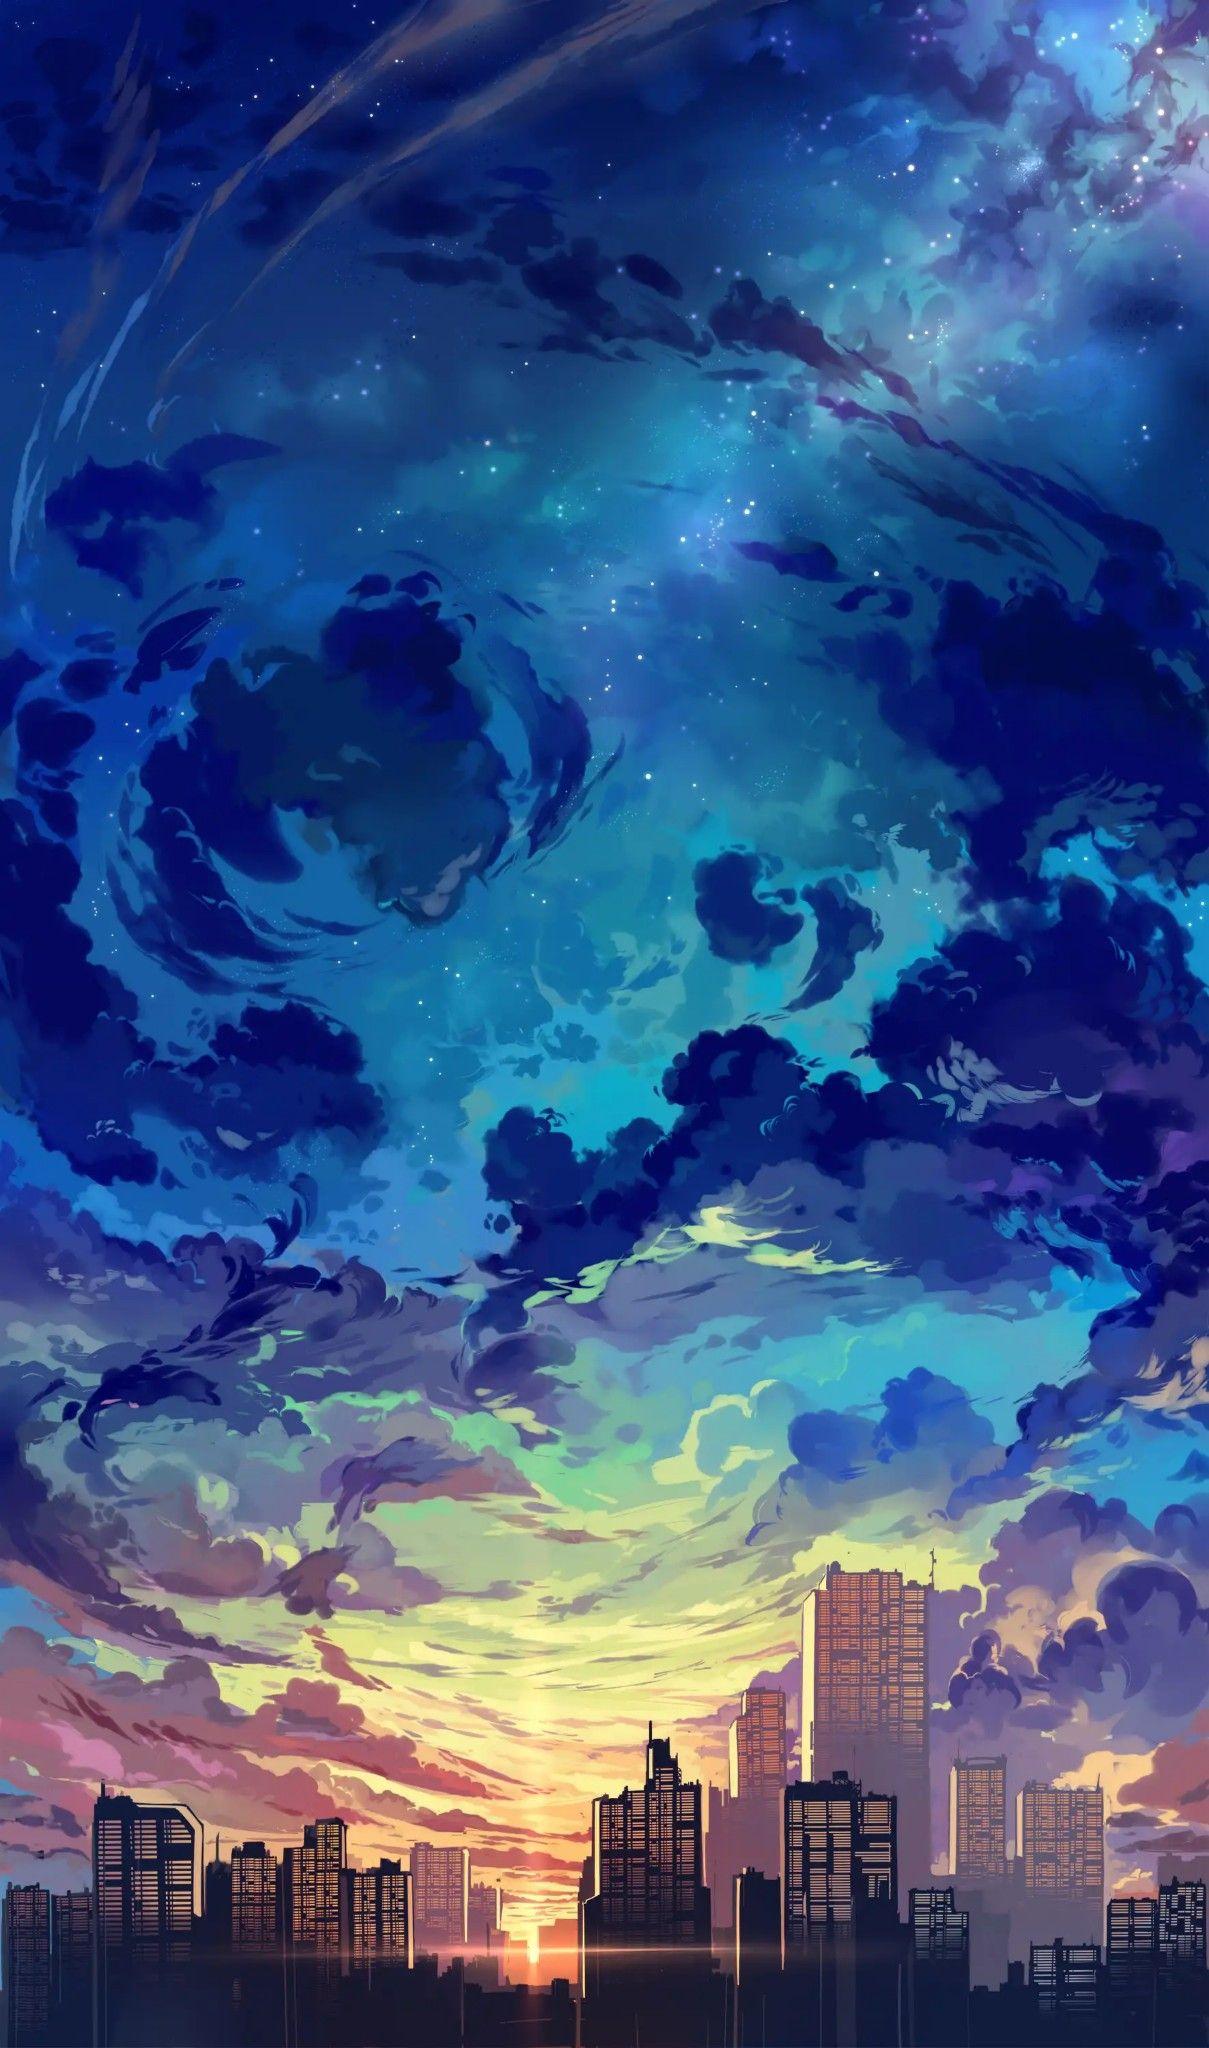 Anime Landscape Android Wallpapers - Wallpaper Cave